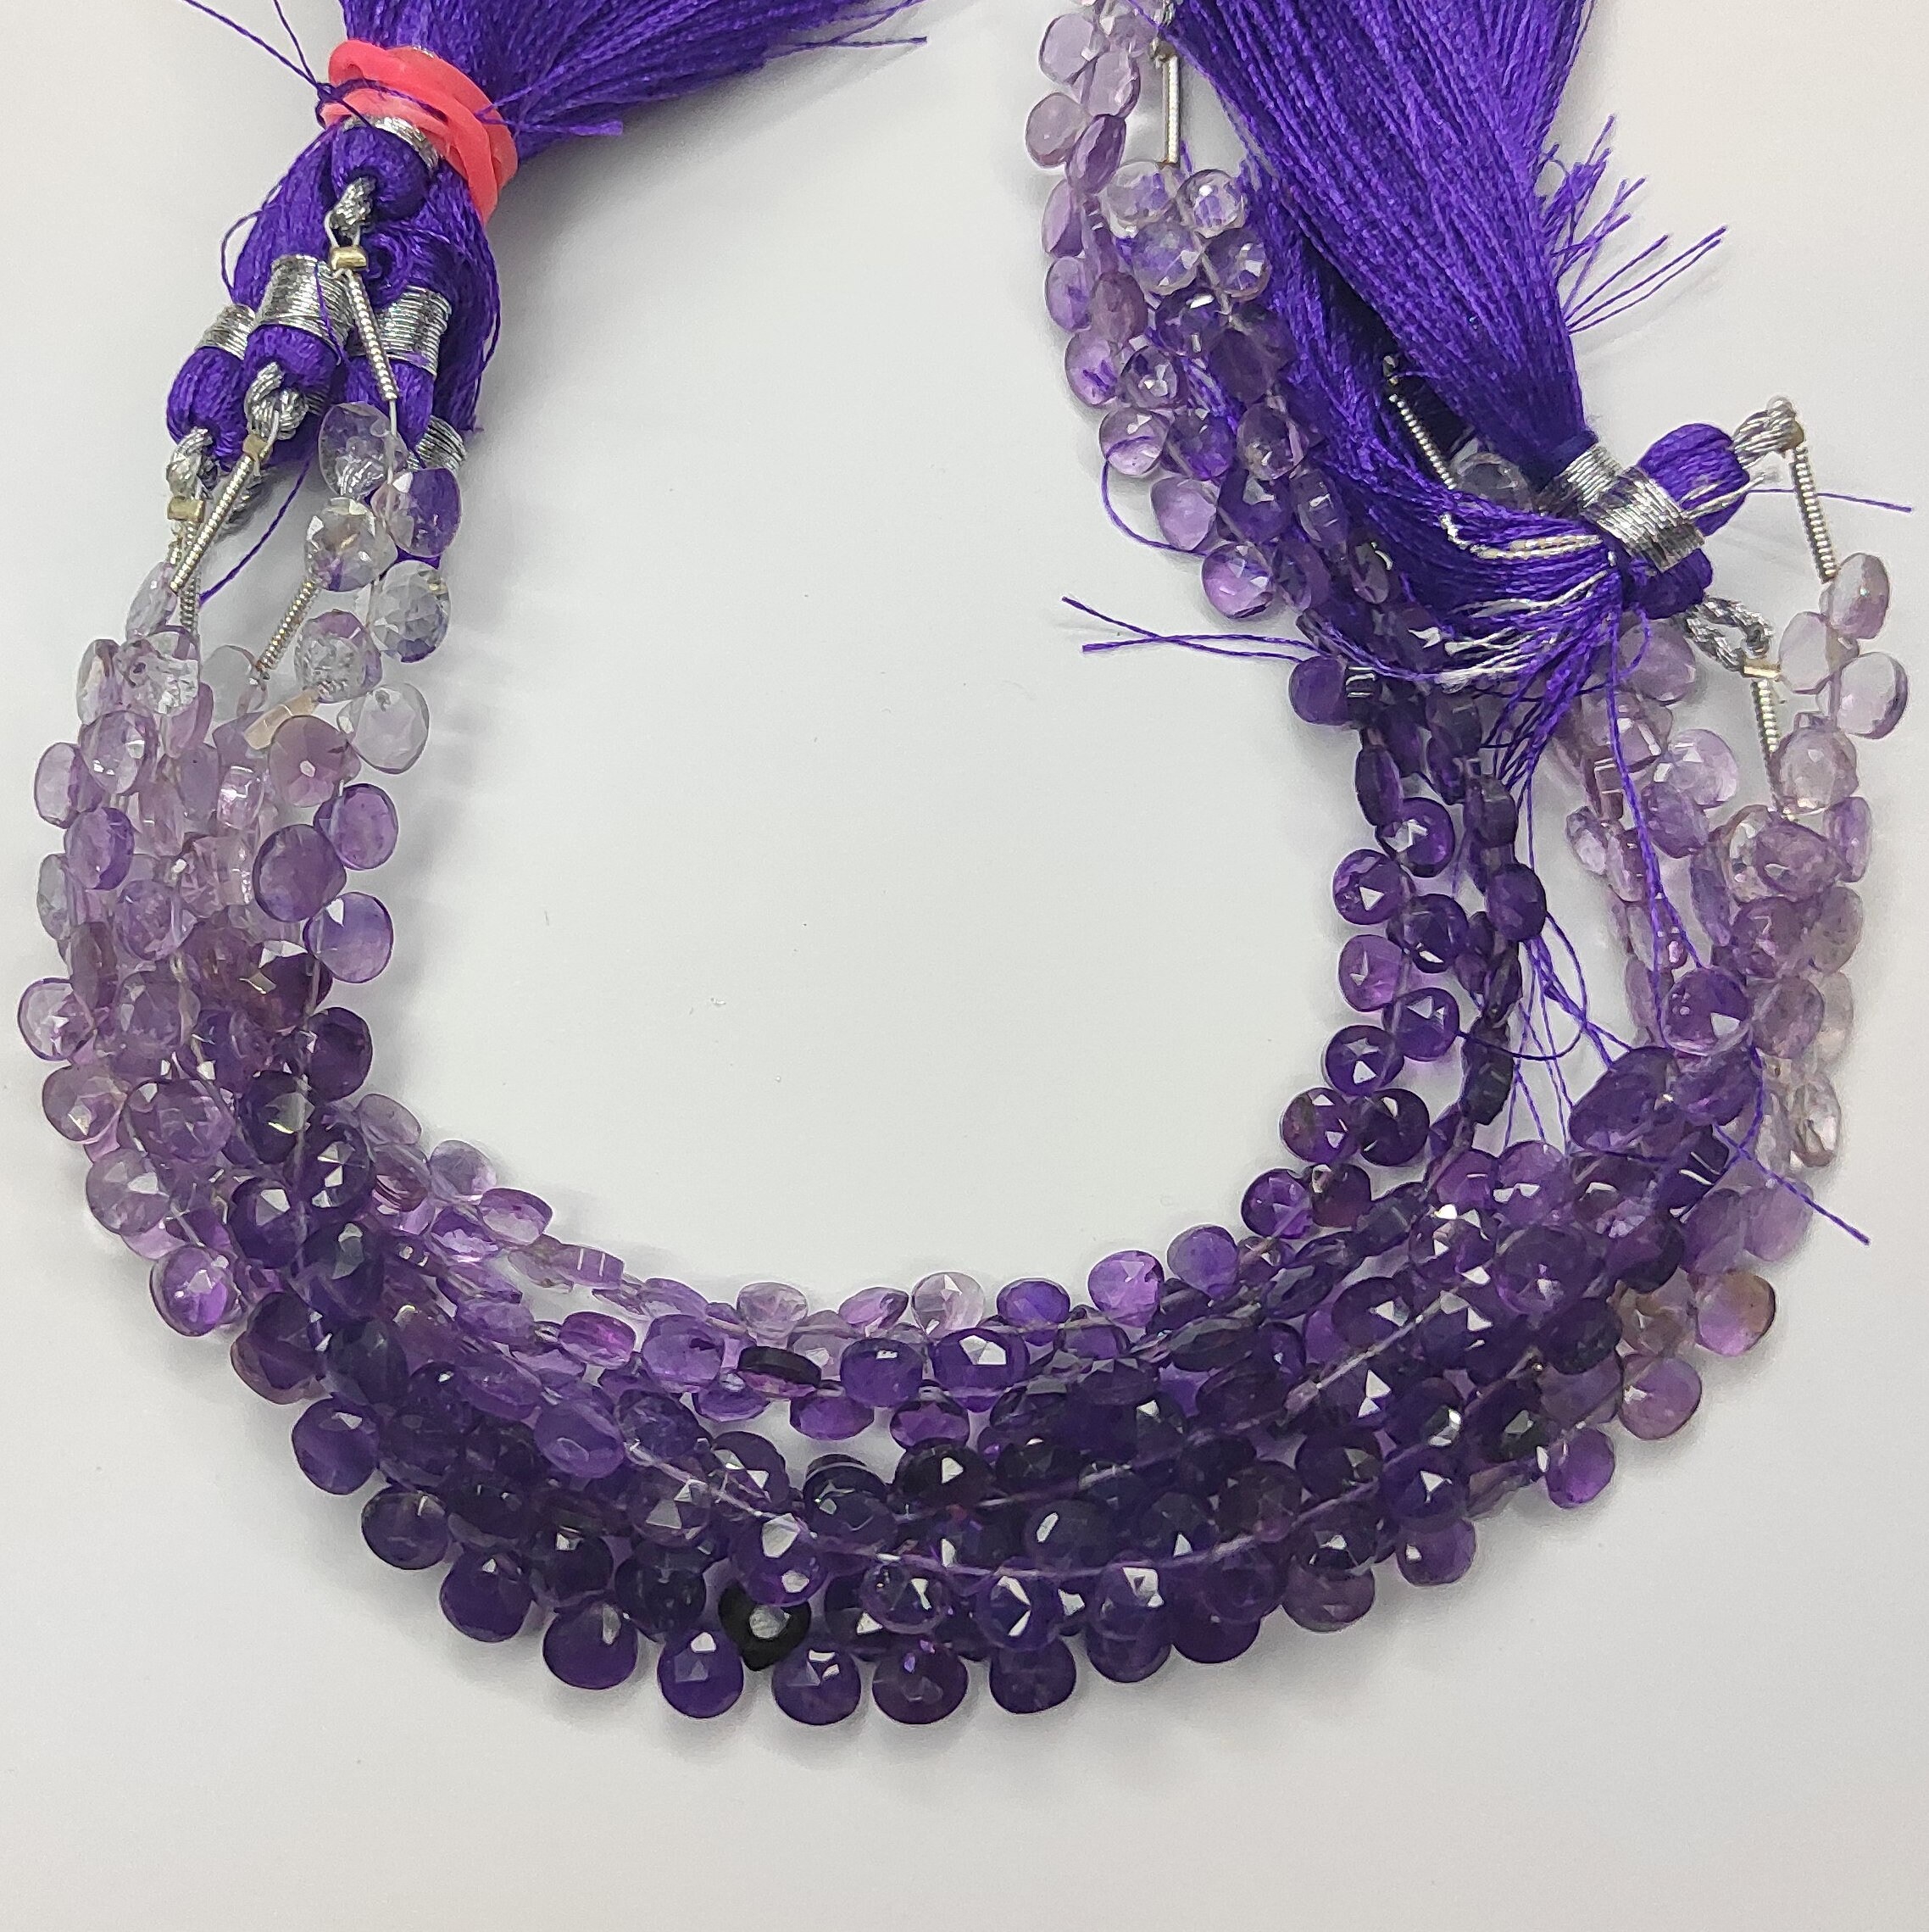 Faceted Gemstone,Semi Precious Bead Natural Amethyst Pear Shape 5-7mm 80Ct 8 Strand,AAA quality,jewelry Making,Amethyst Faceted Pear Bead